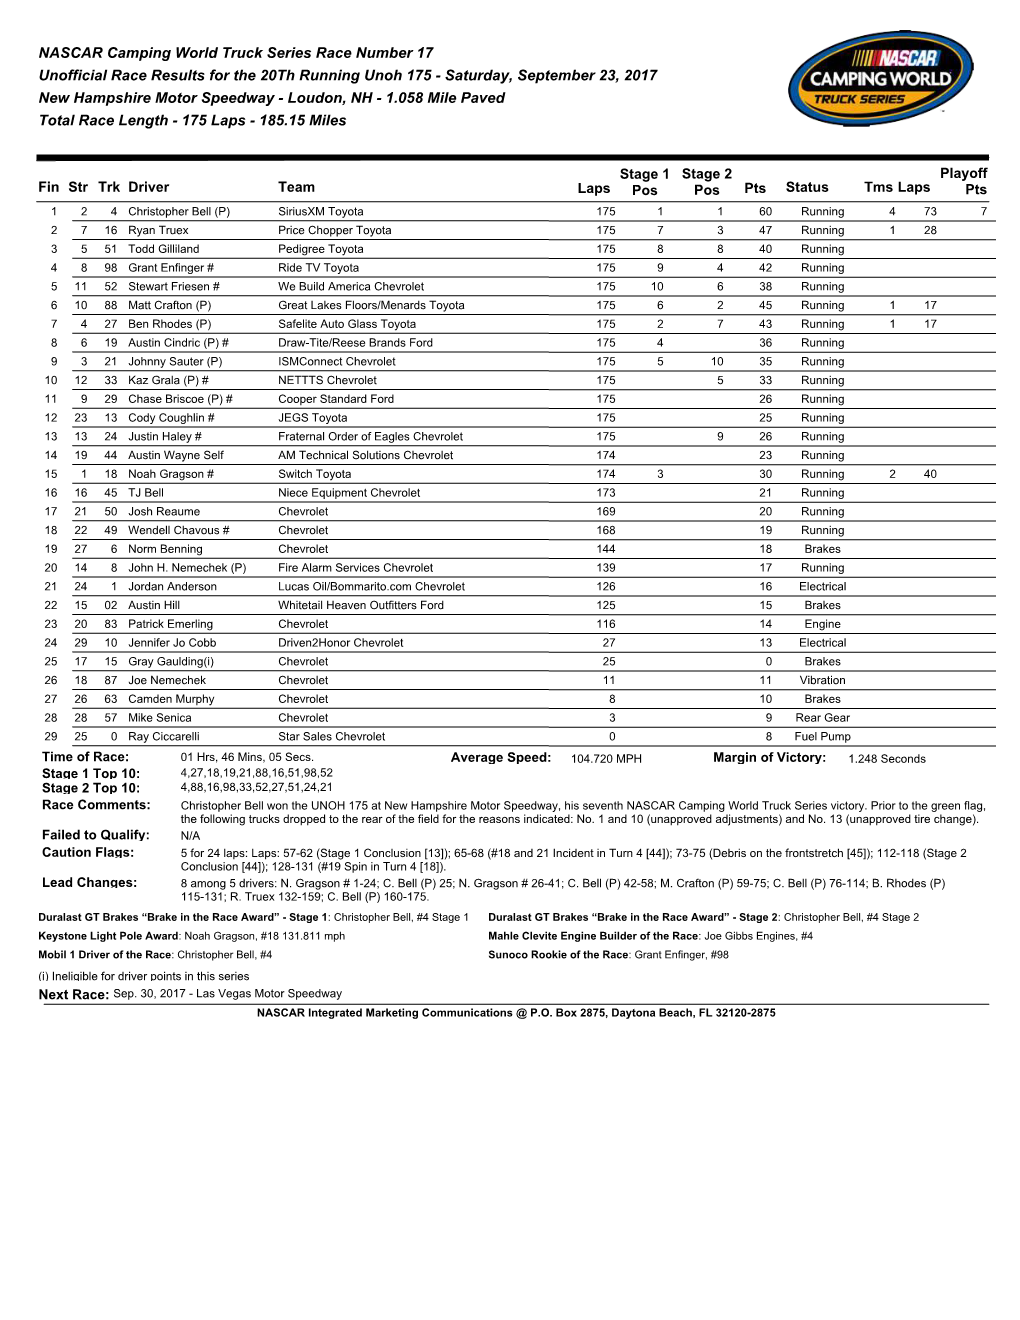 NASCAR Camping World Truck Series Race Number 17 Unofficial